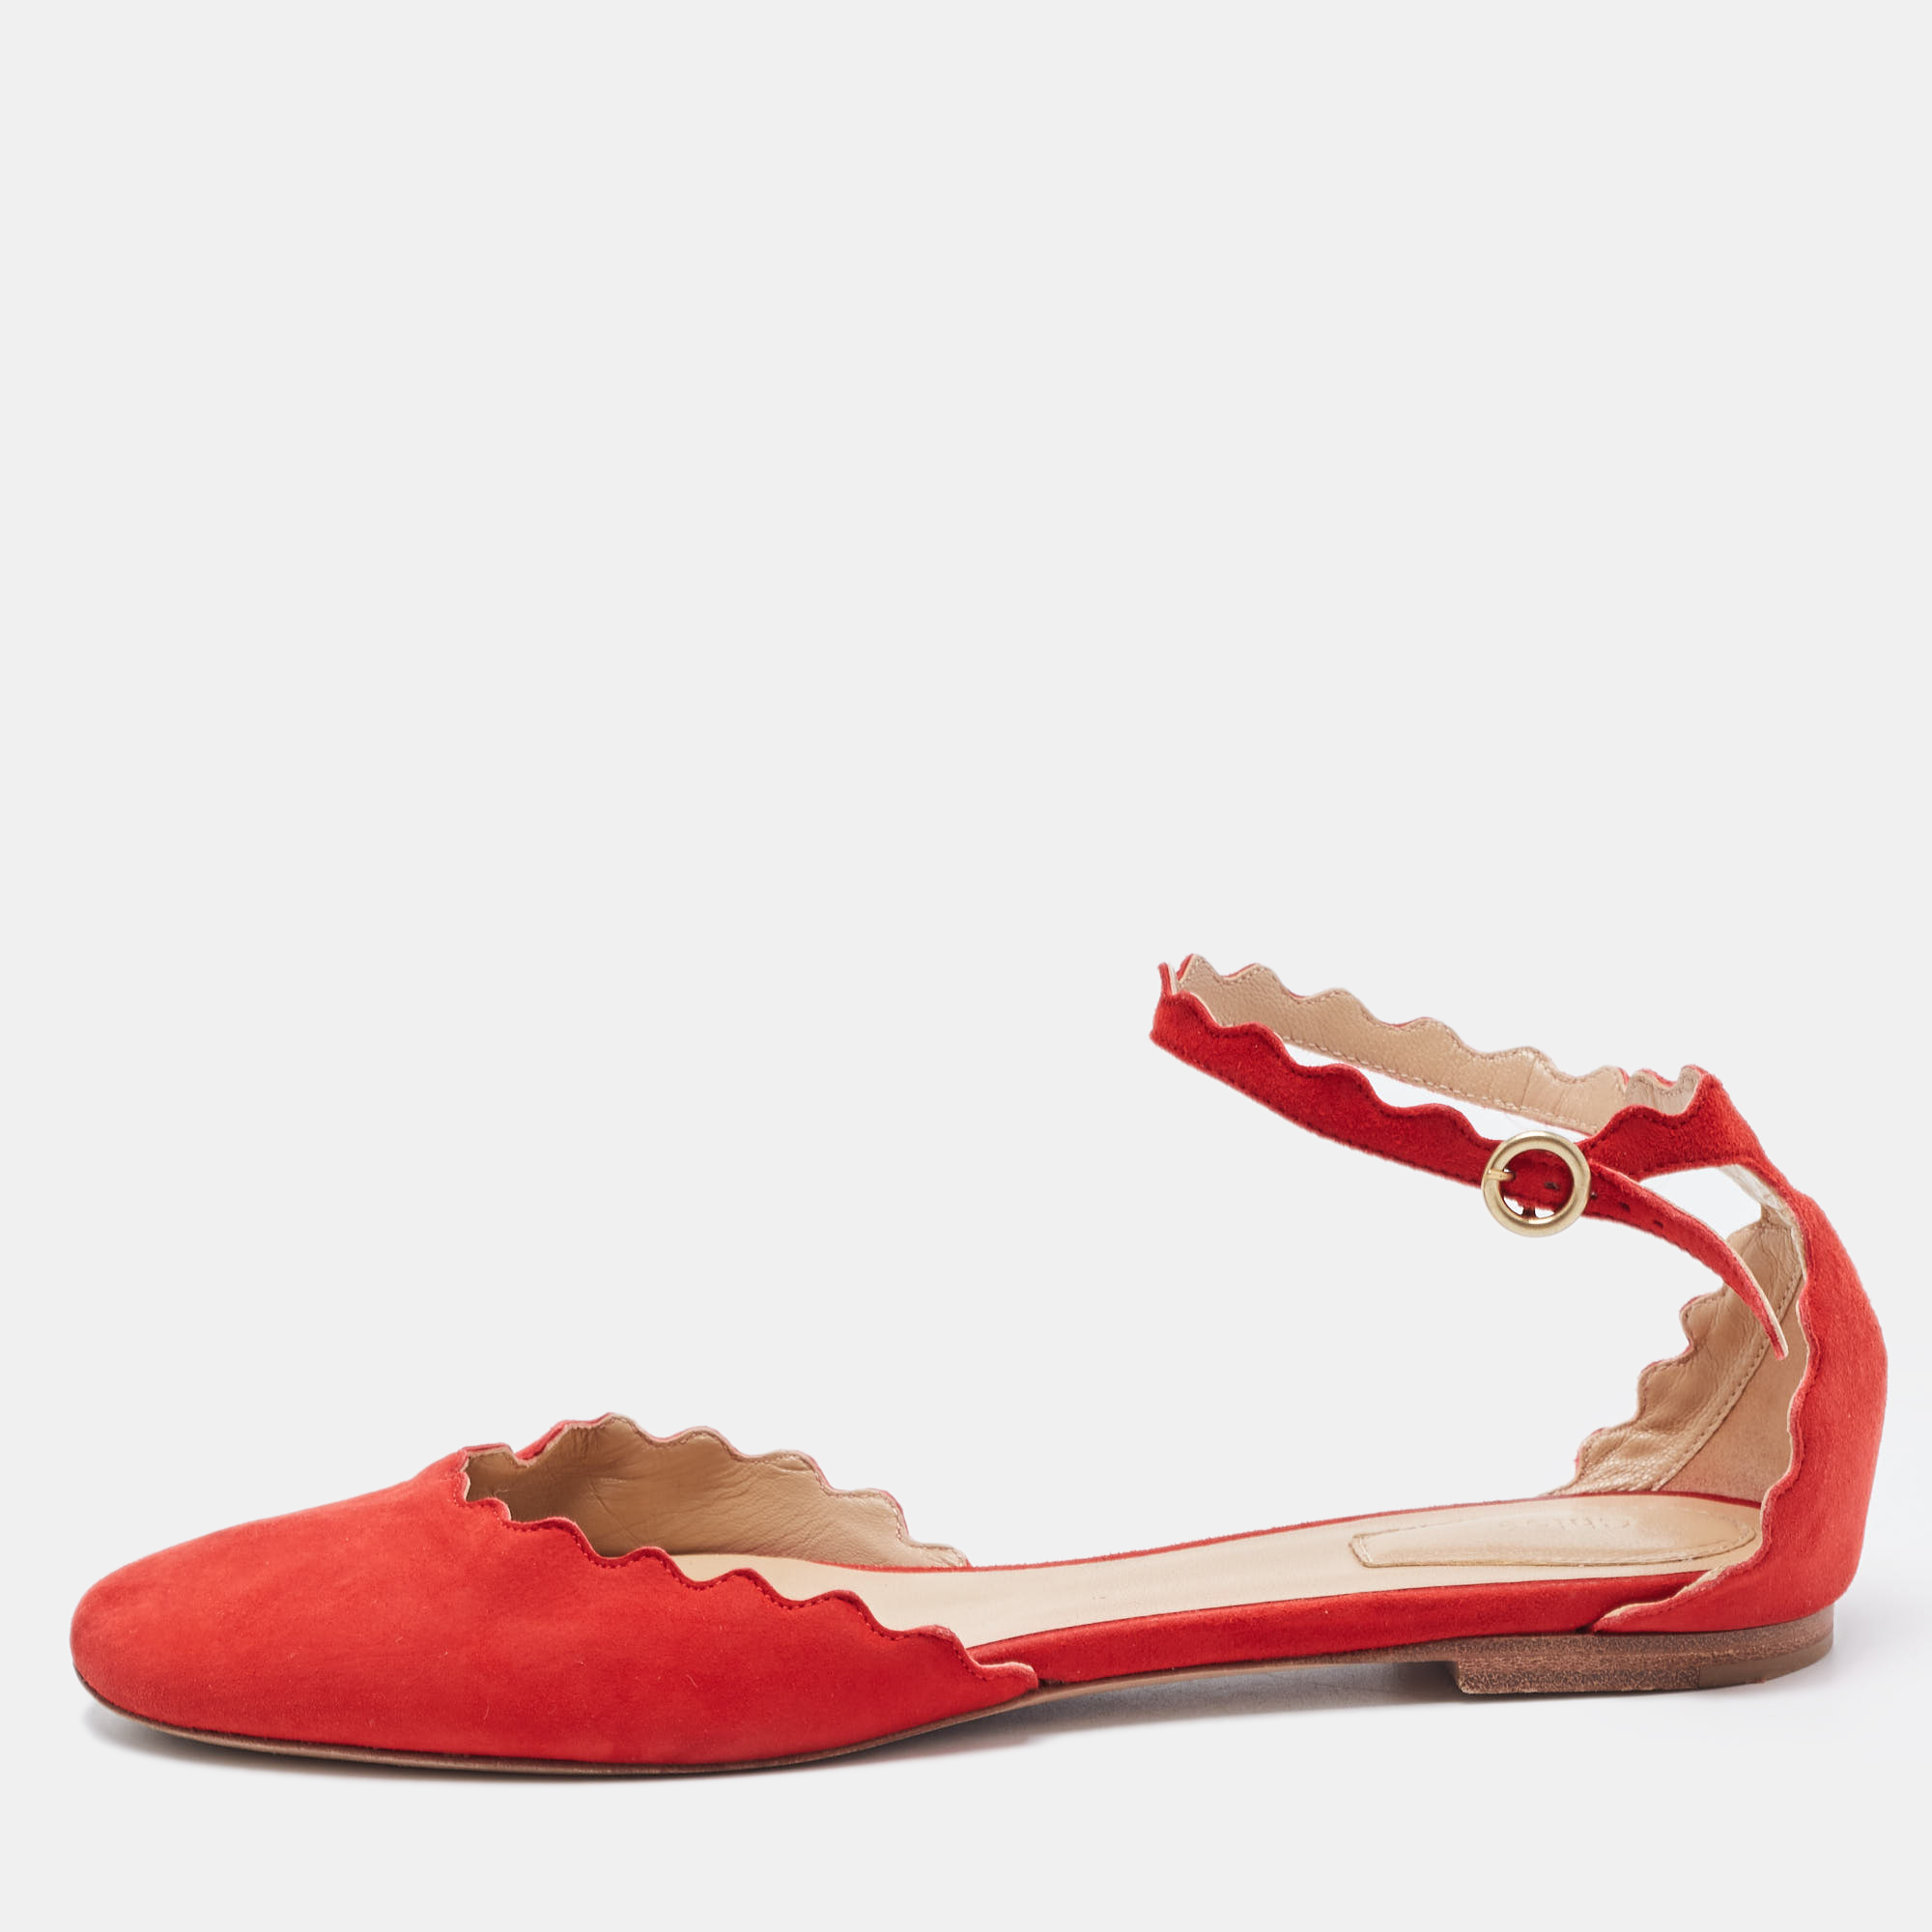 Pre-owned Chloé Red Scalloped Suede Lauren Ankle Strap Flats Size 38.5